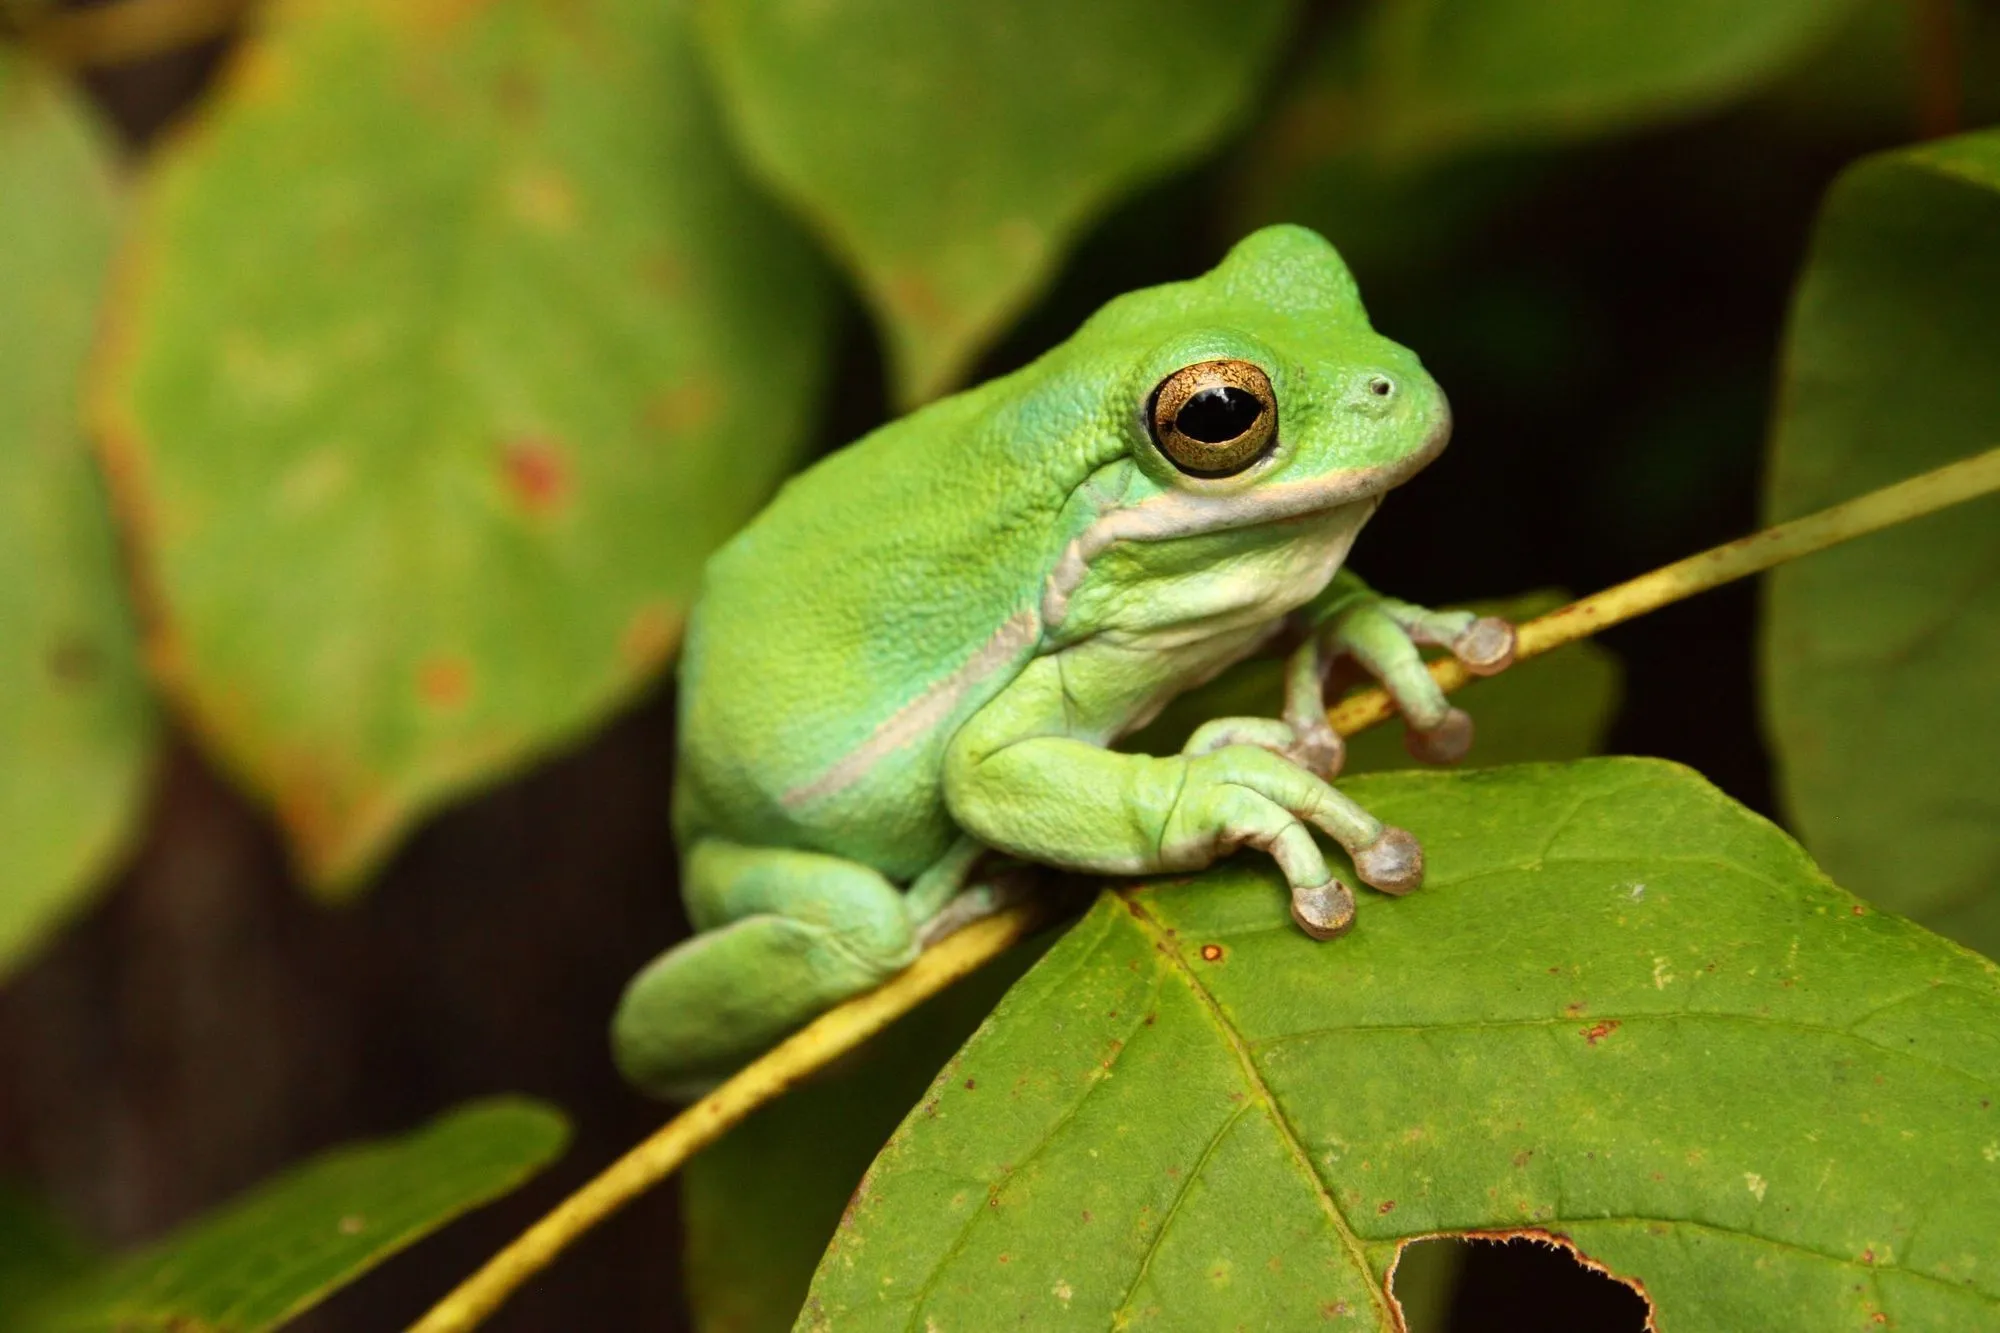 Agile frogs are a diurnal species.